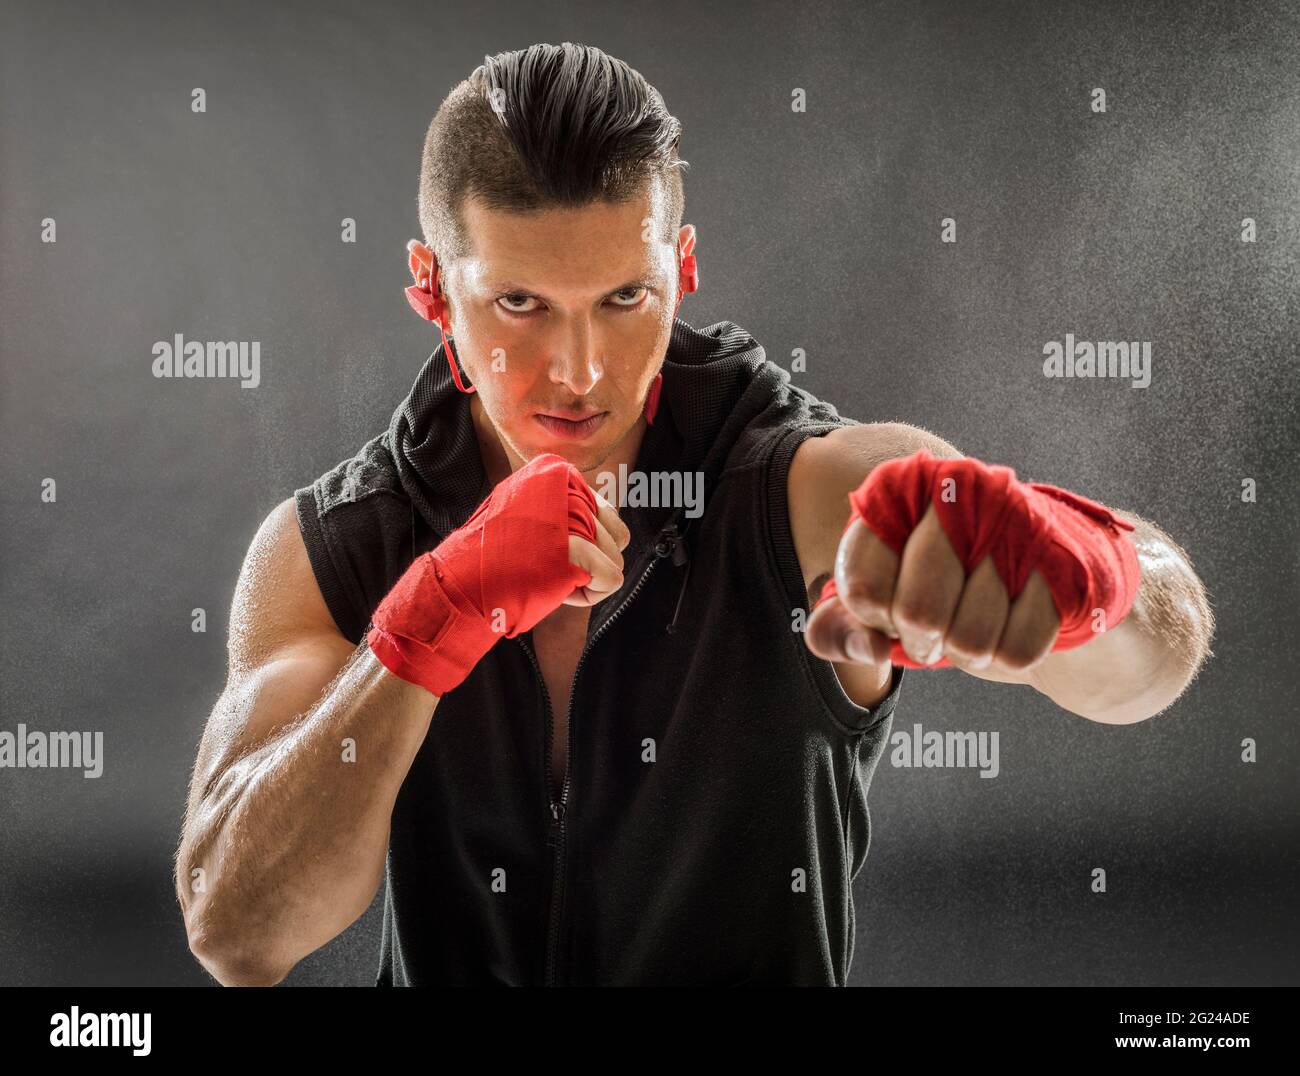 Portrait of muscular man in boxing stance Stock Photo - Alamy